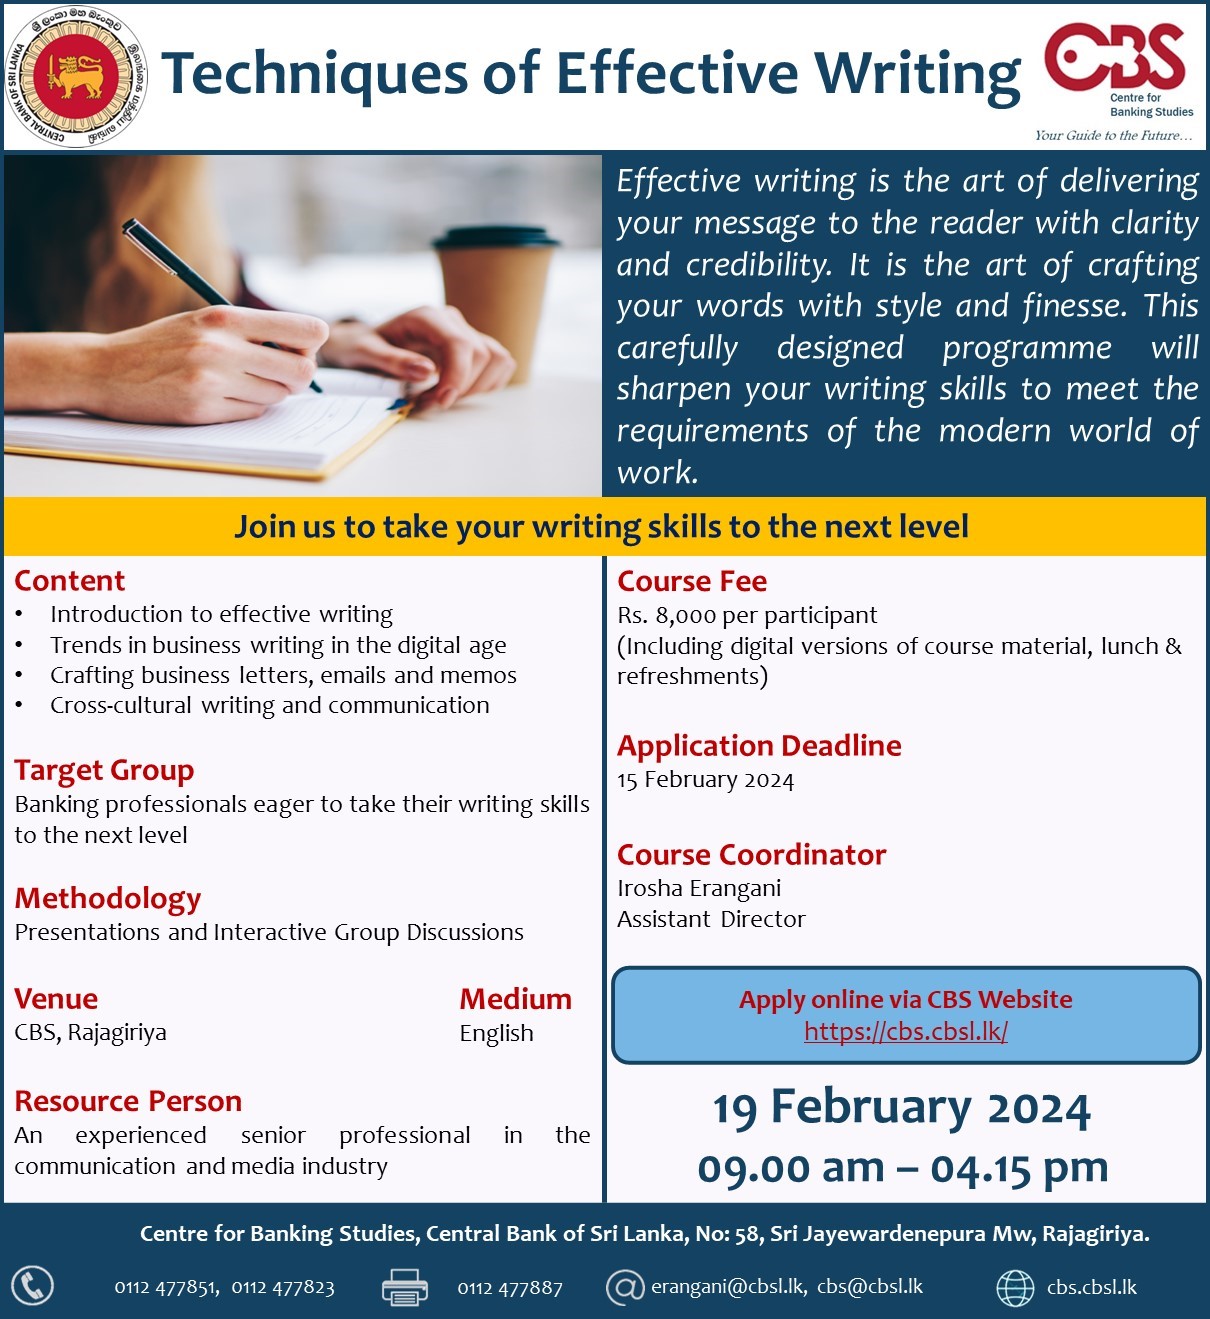 Programme on Techniques of Effective Writing - 19 February 2024